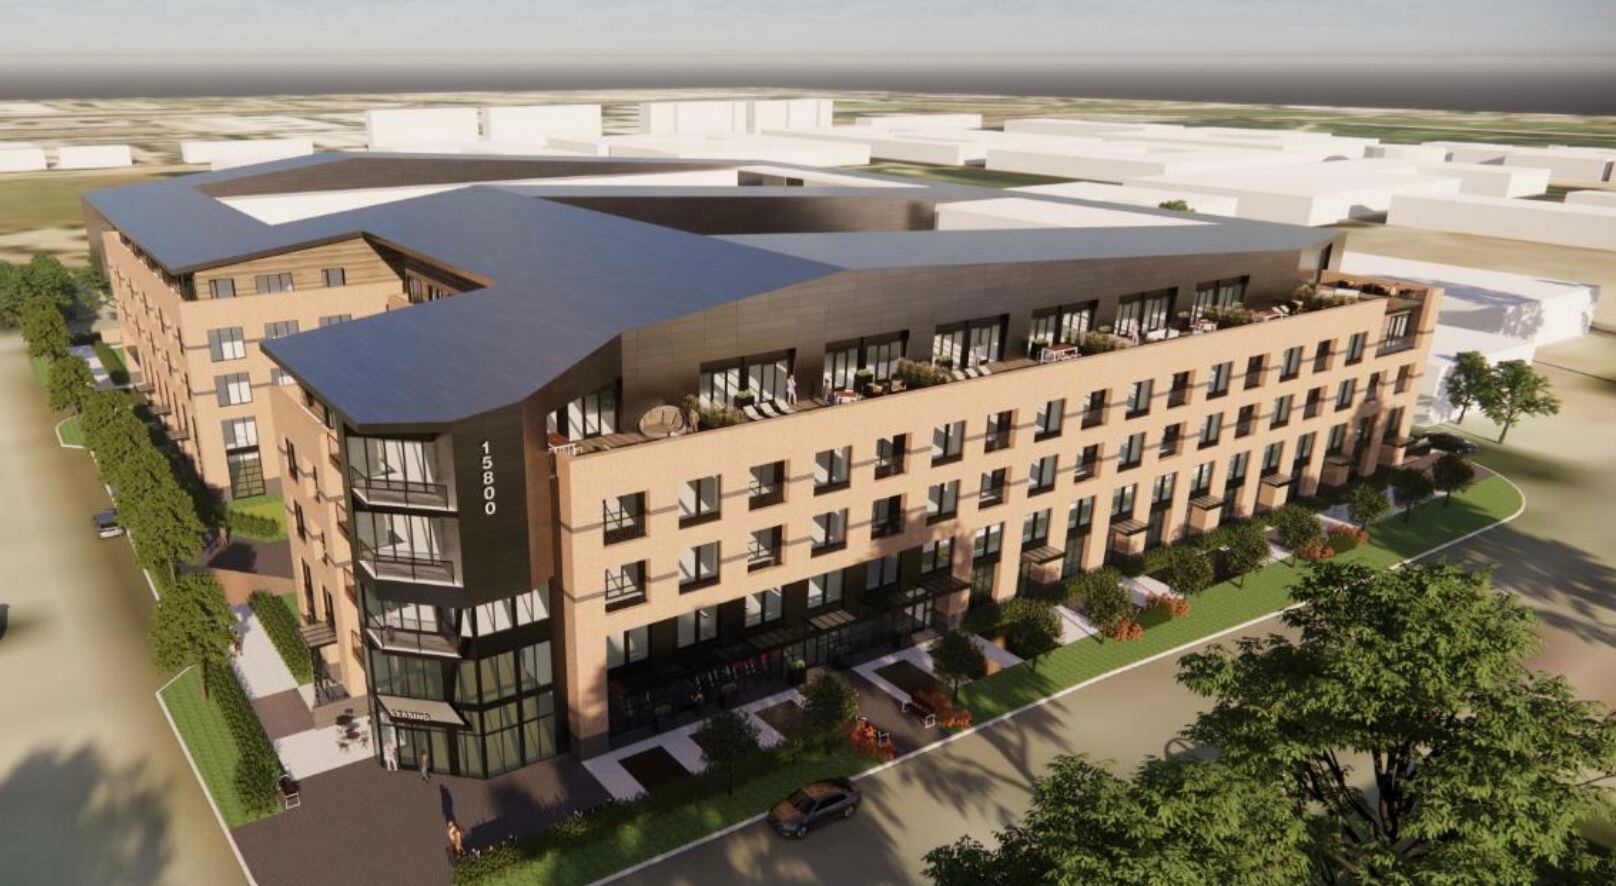 Apartment builder JPI is planning a new rental community on Addison Road near Addison Airport.